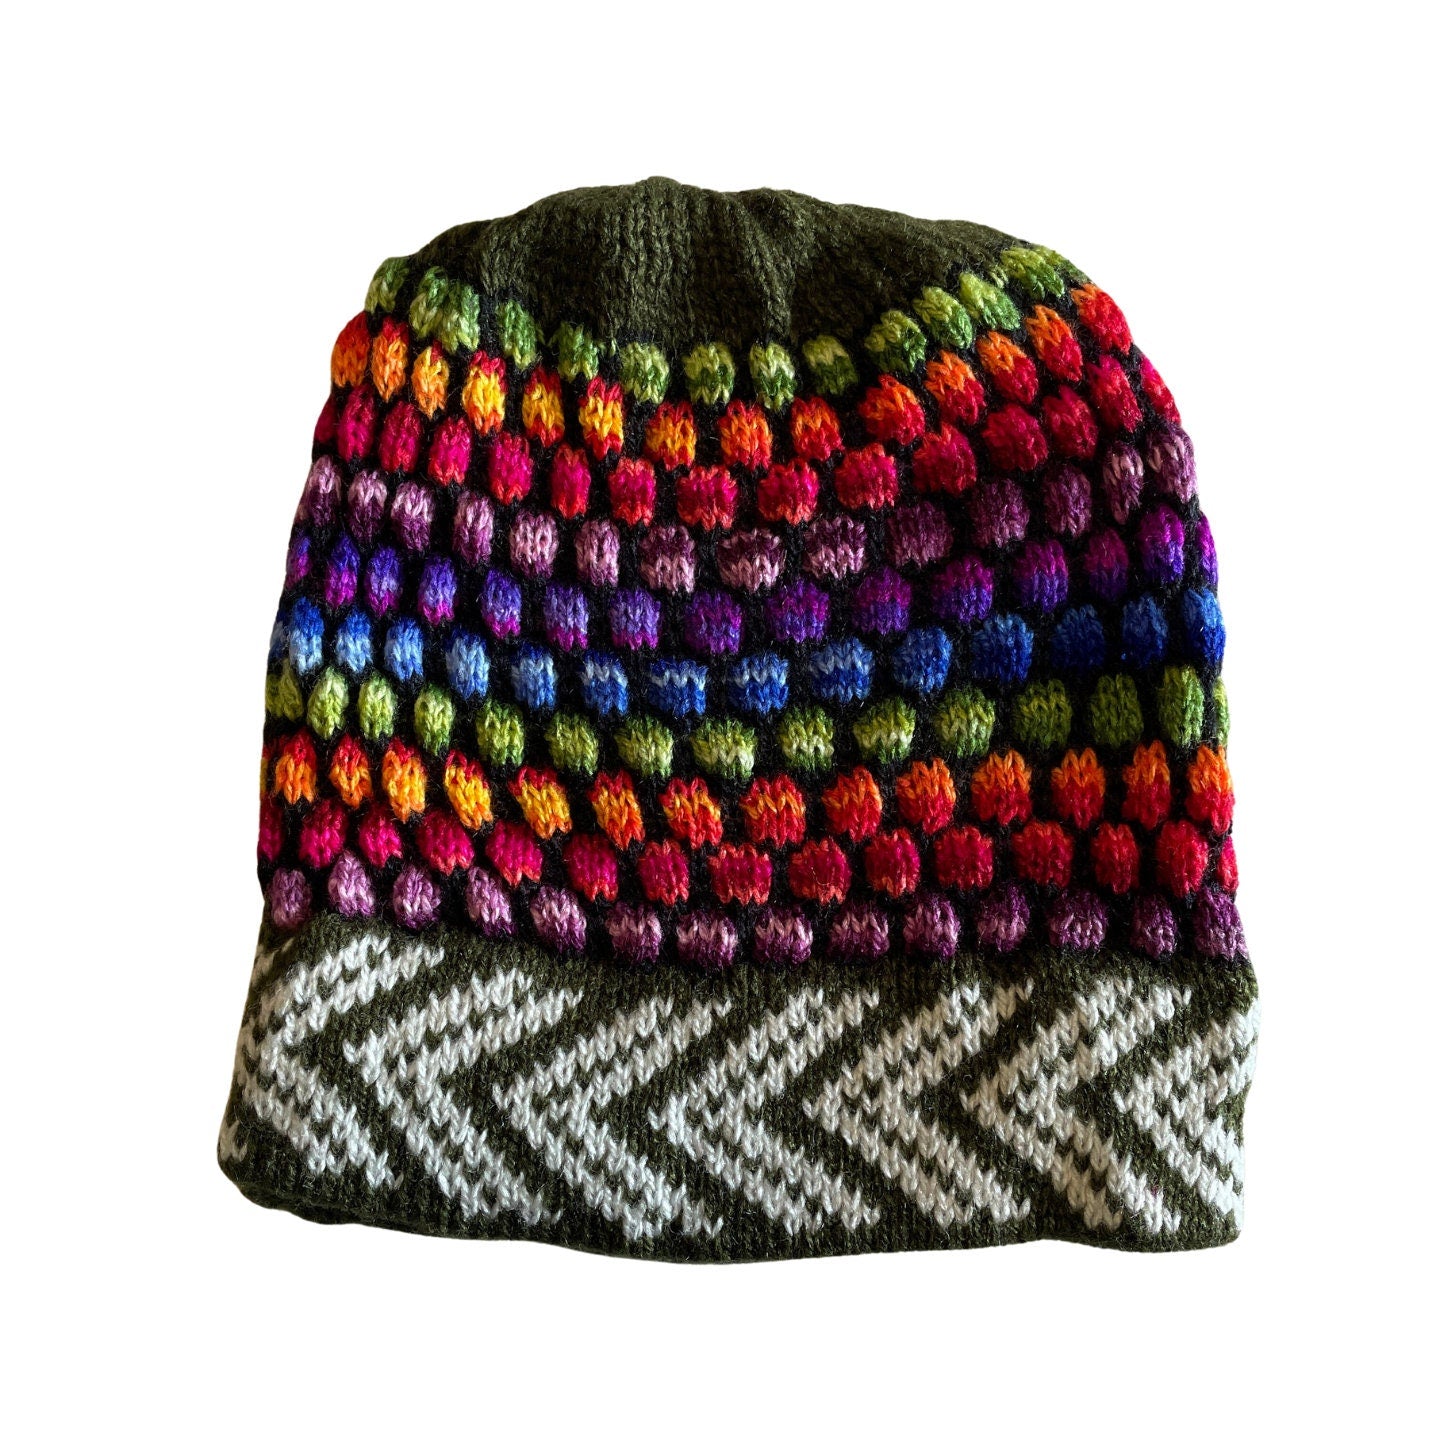 Olive Colorful Knitted Alpaca Beanie Hat  - One size